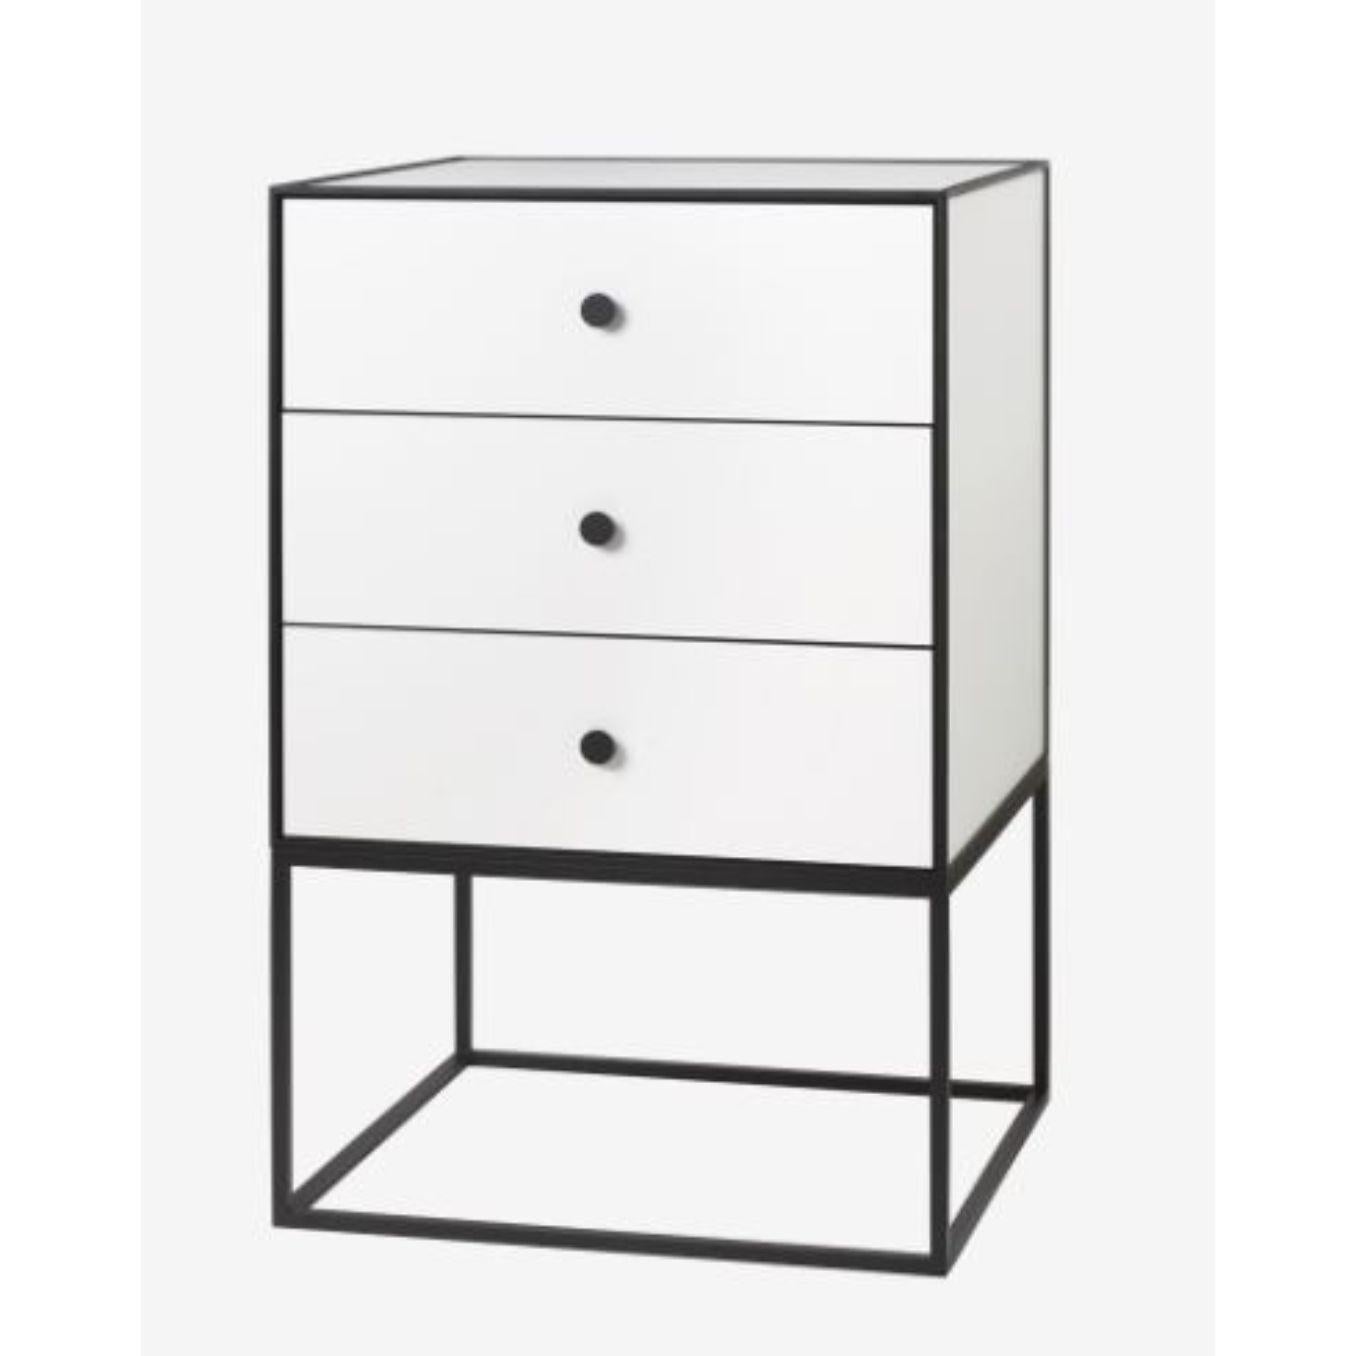 49 white frame sideboard with 3-drawers by Lassen
Dimensions: d 49 x w 42 x h 77 cm 
Materials: Finér, Melamin, Melamine, Metal, Veneer
Also available in different colors and dimensions. 
Weight: 21 Kg

By Lassen is a Danish design brand